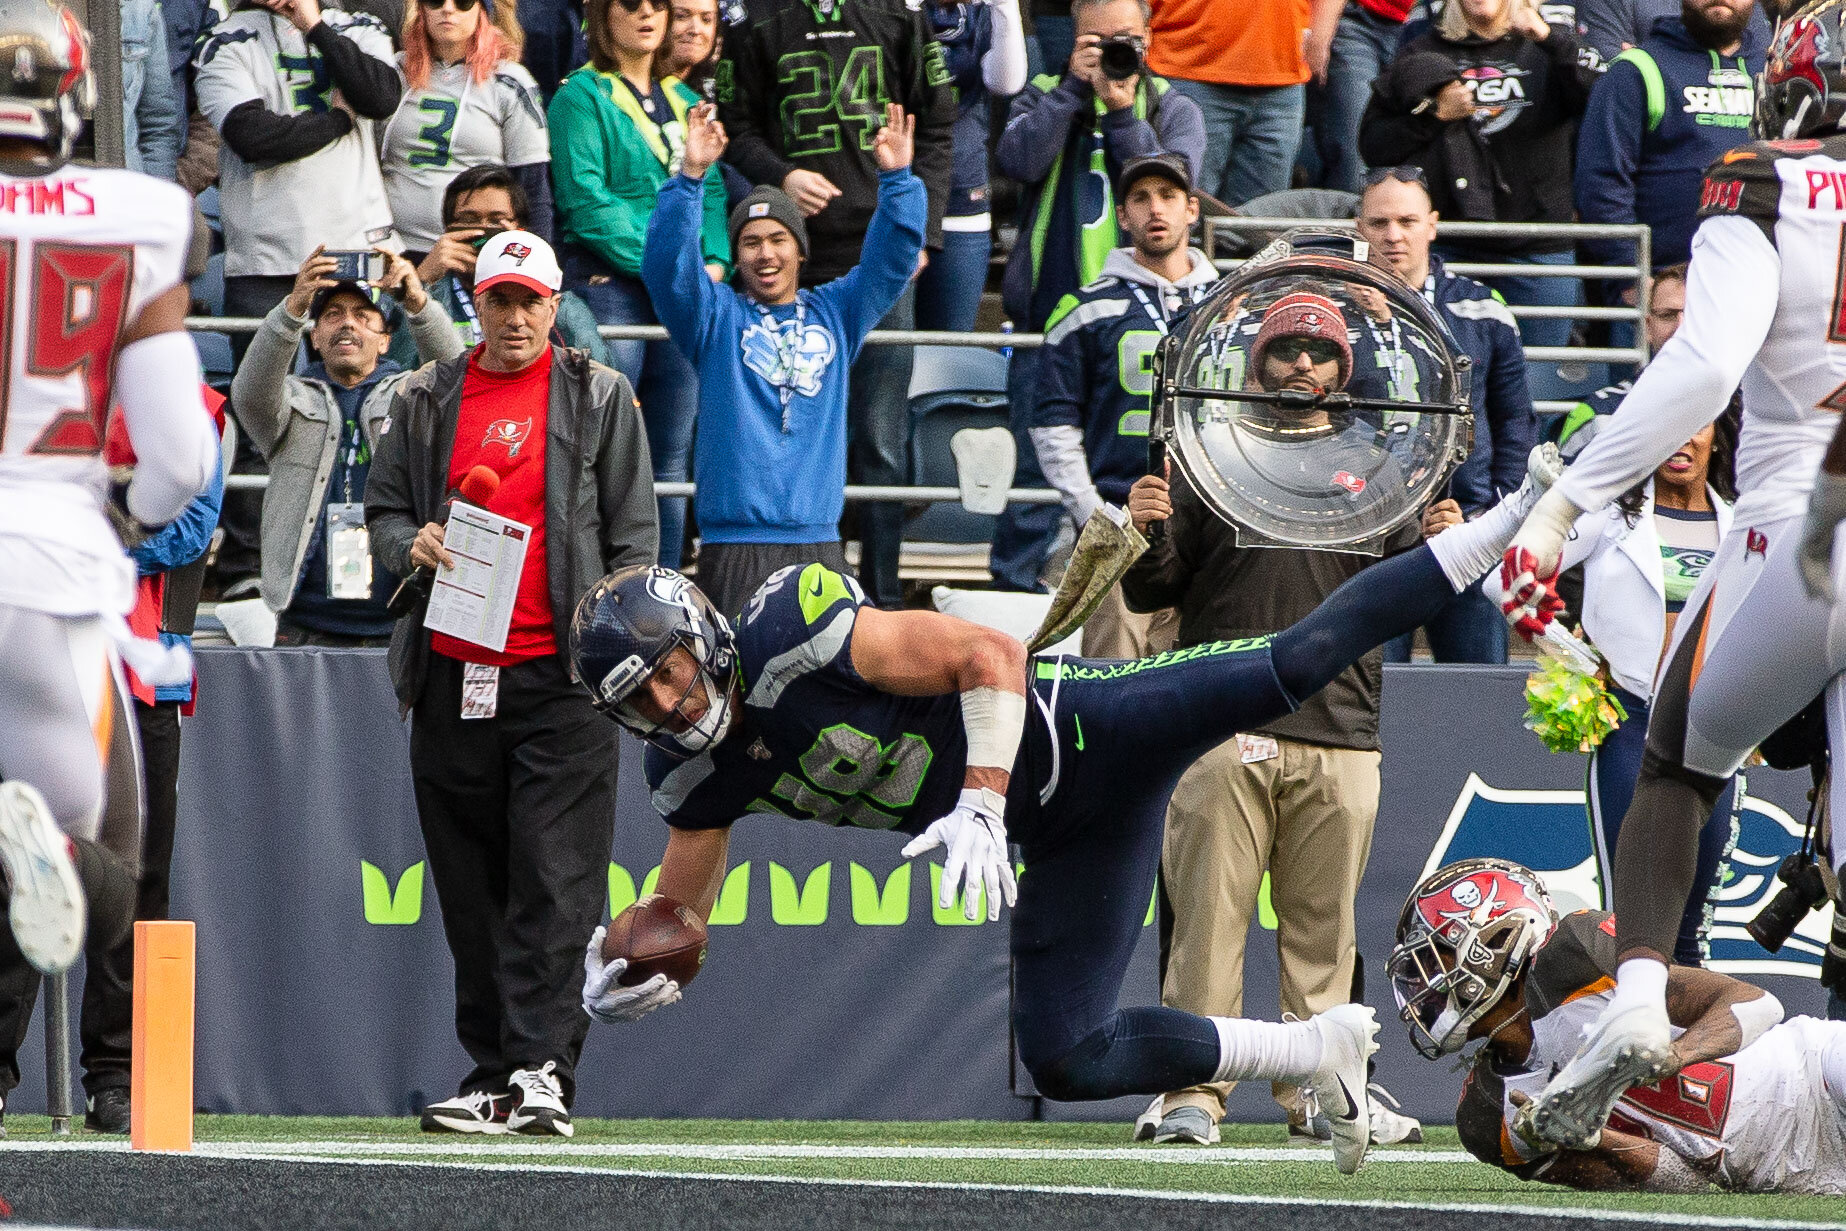  Seattle Seahawks tight end Jacob Hollister (48) breaks across the goal line during the second quarter of an NFL football game against the Tampa Bay Buccaneers, Sunday, Nov. 3, 2019, in Seattle. Seattle defeated Tampa Bay 40-34 in overtime. (Matt Fer